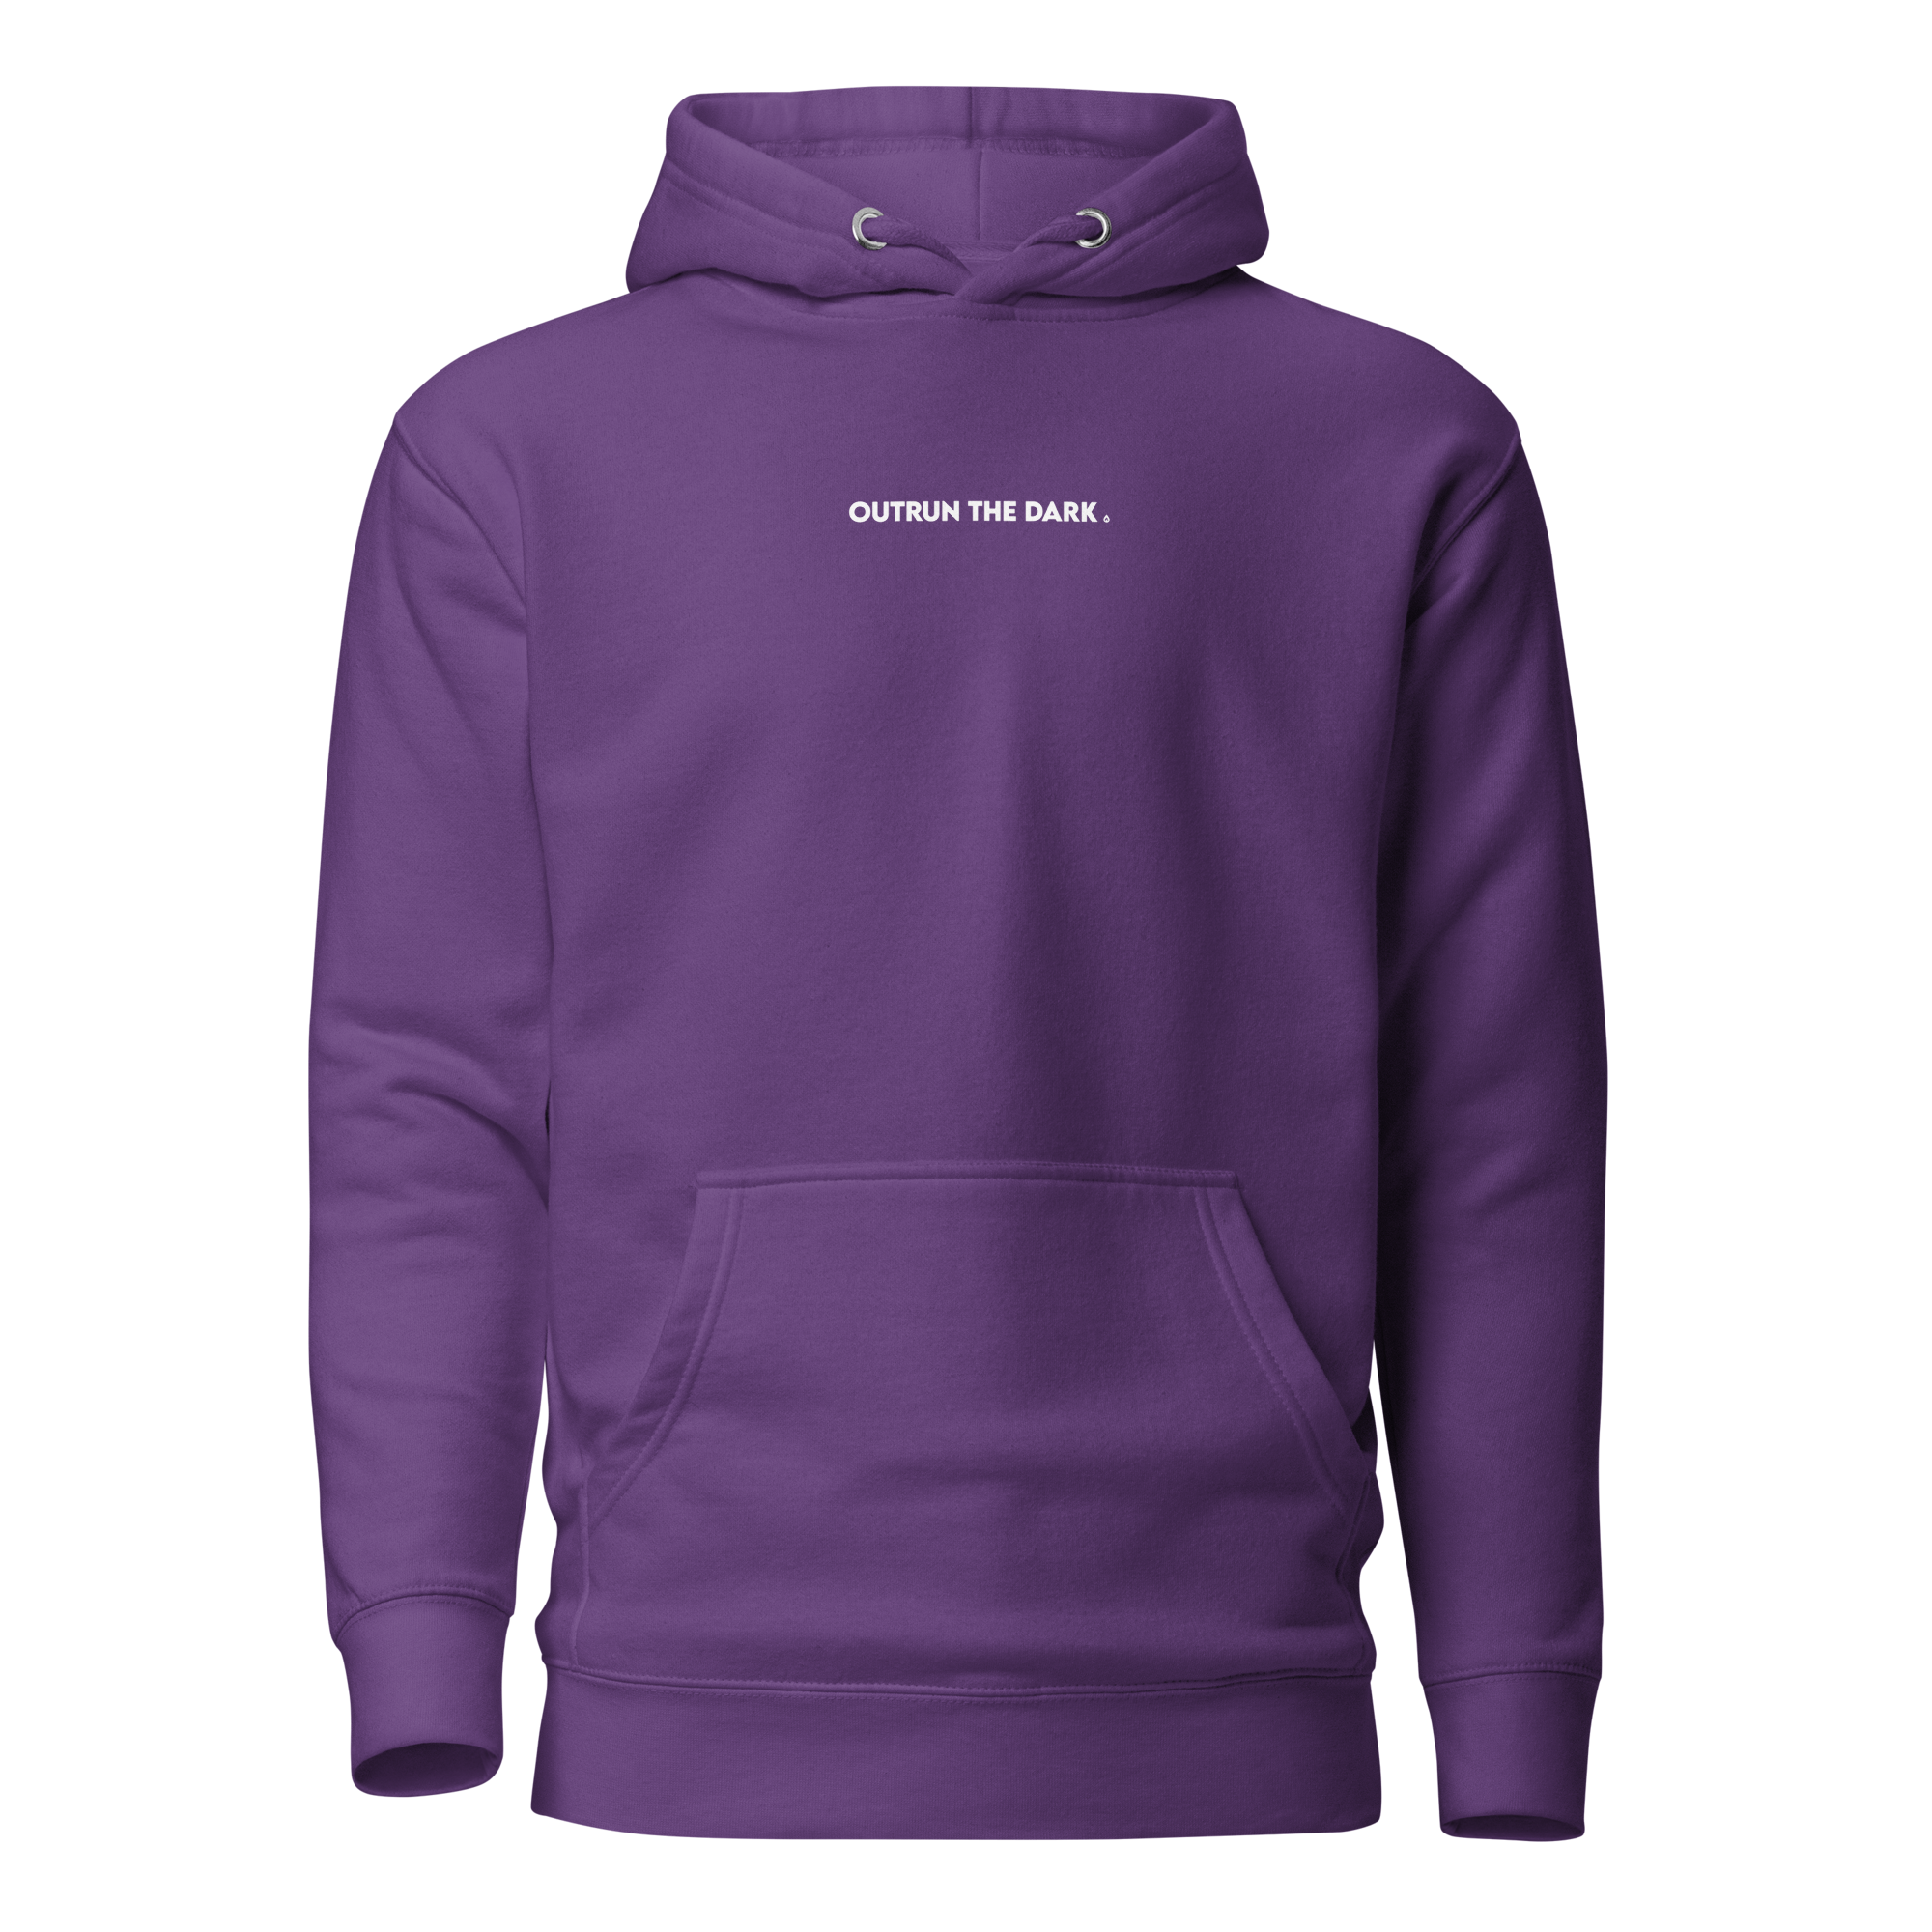 Outrun the dark Women's Fitted Hoodie